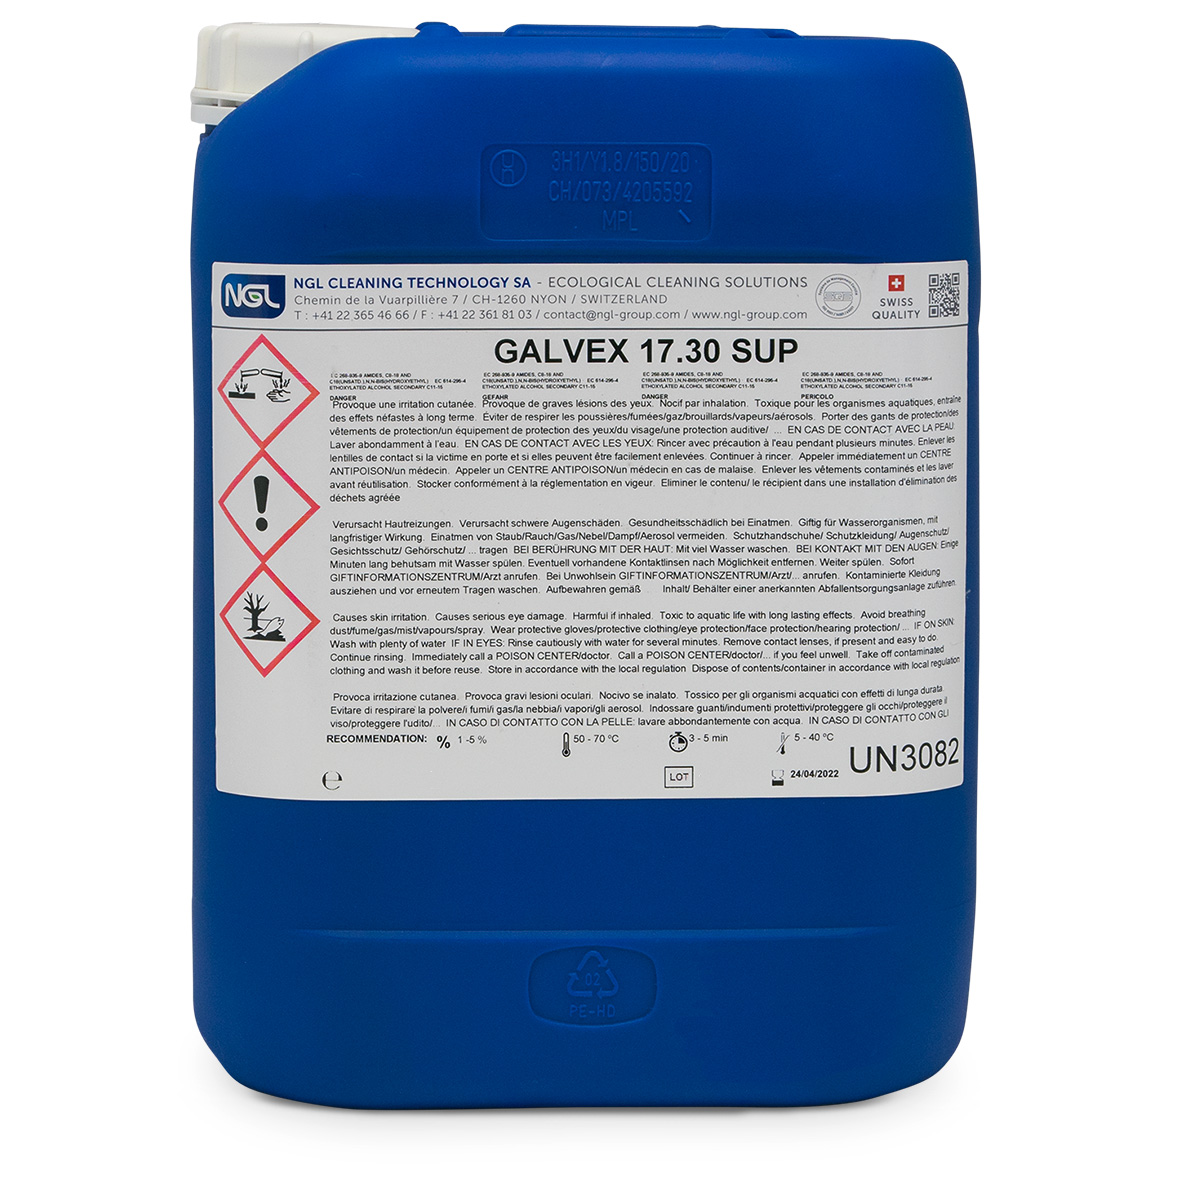 Galvex 17.30 SUP ultrasonic cleaning fluid, 5 liters